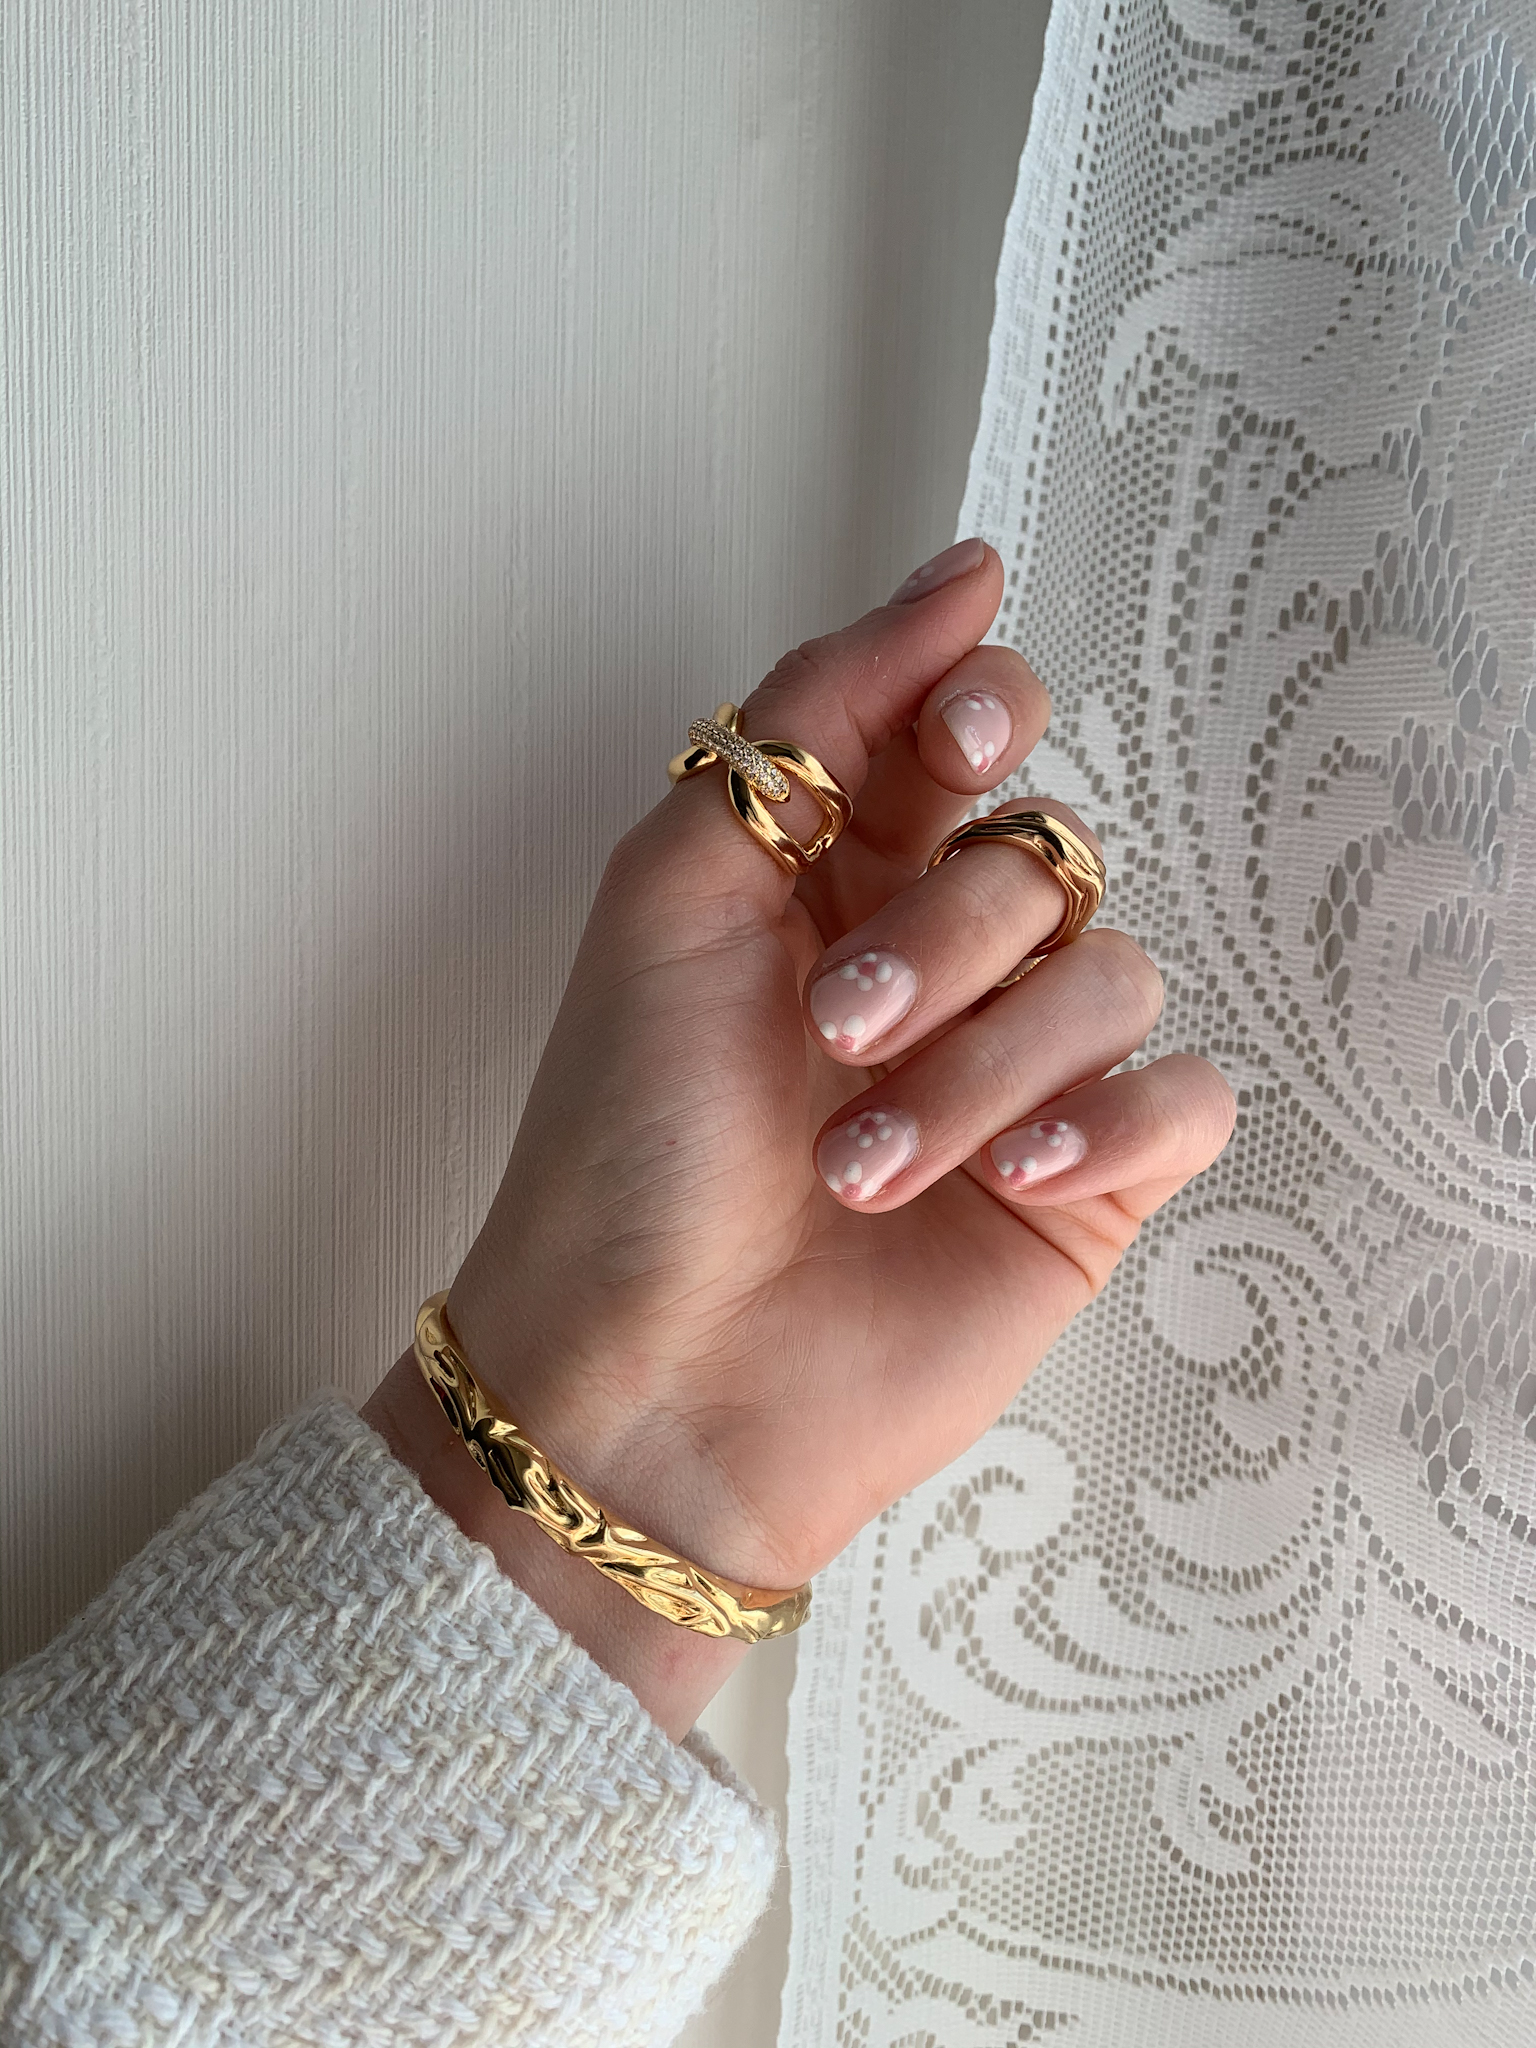 floral nails, alessandro striplac, pink nails, nude, Sif Jakobs, rings